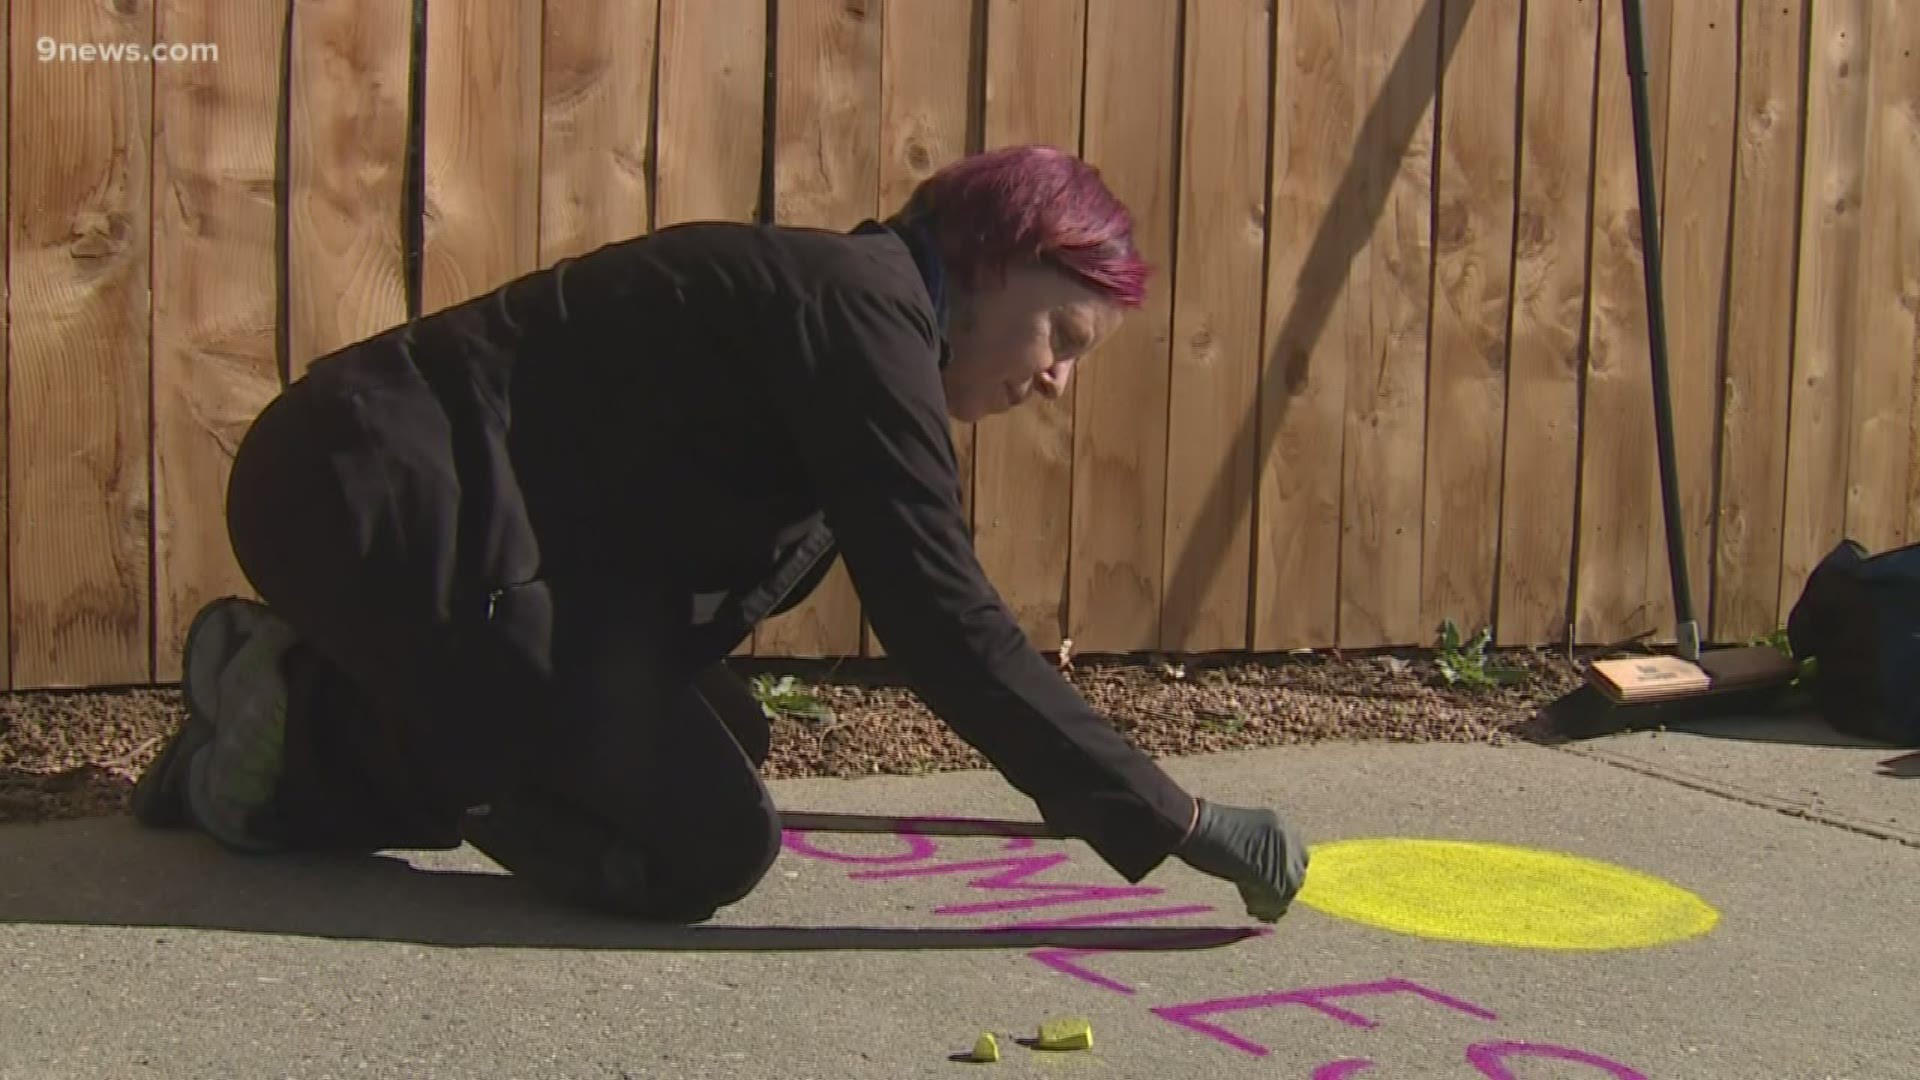 A chalk artist in Aurora is reminding people that smiles are contagious.